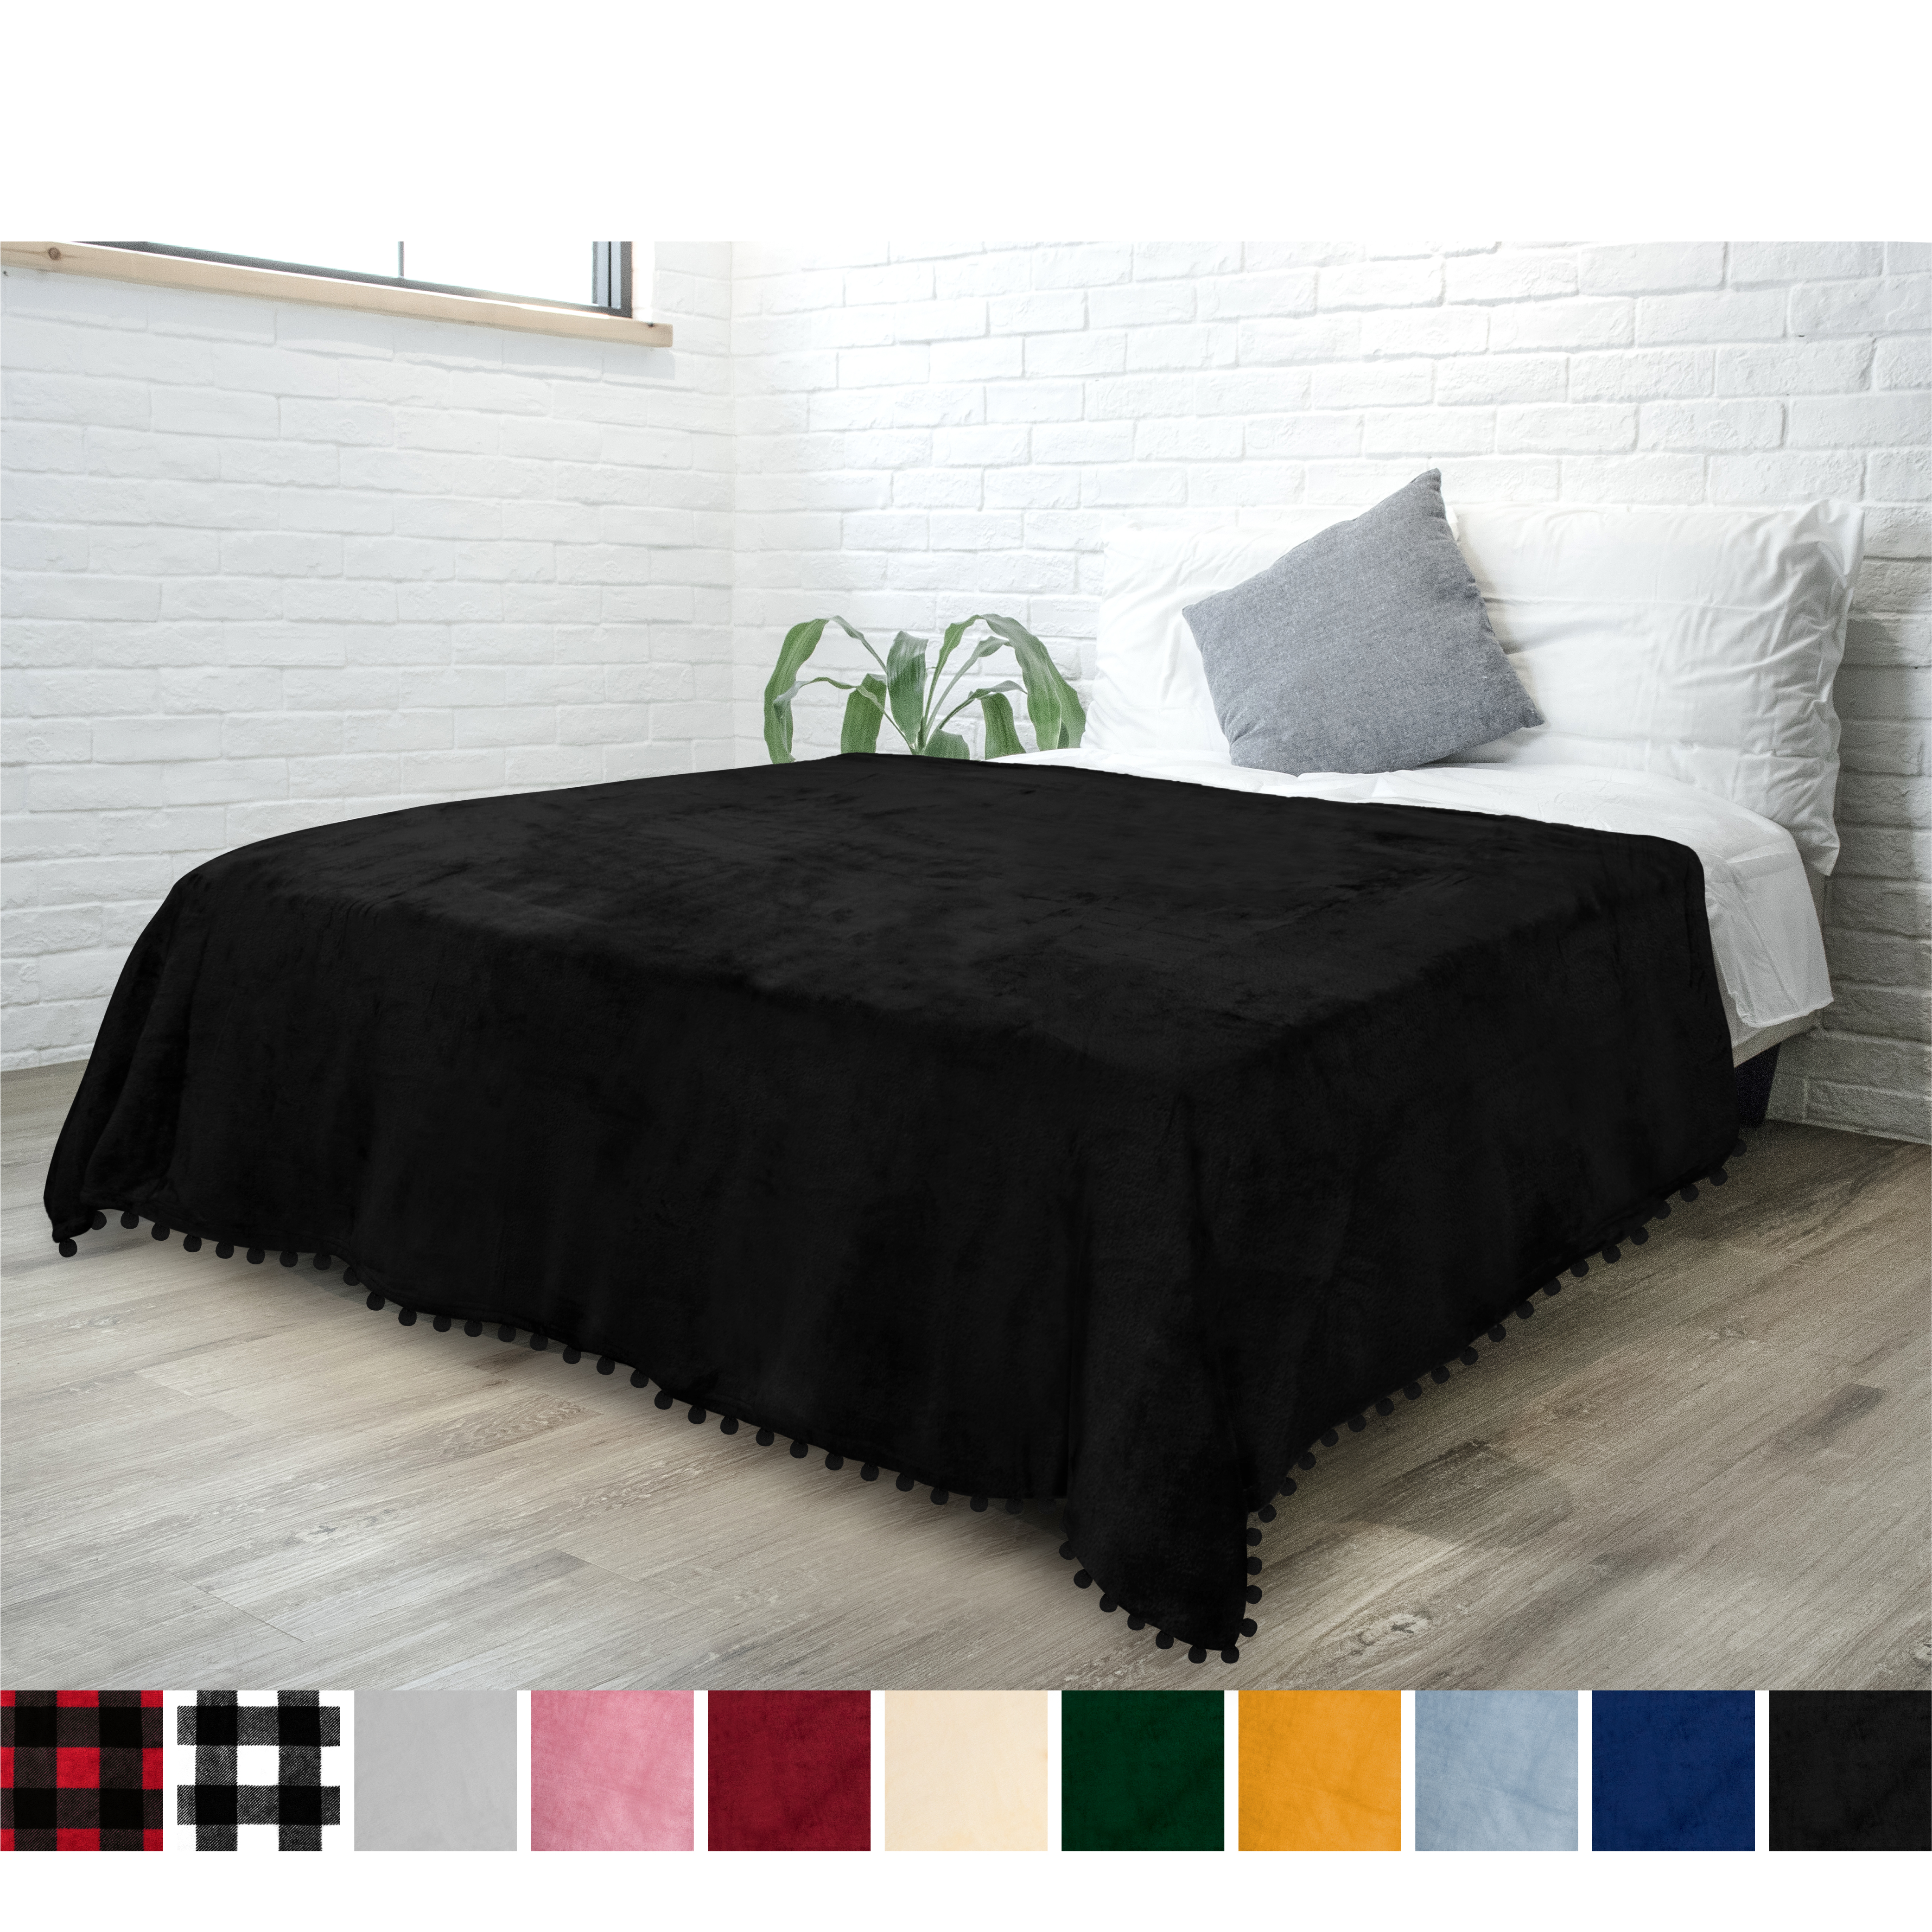 thumbnail 9 - Fleece Throw Blanket with Pom Pom Fringe Super Soft Lightweight Bed Couch Home